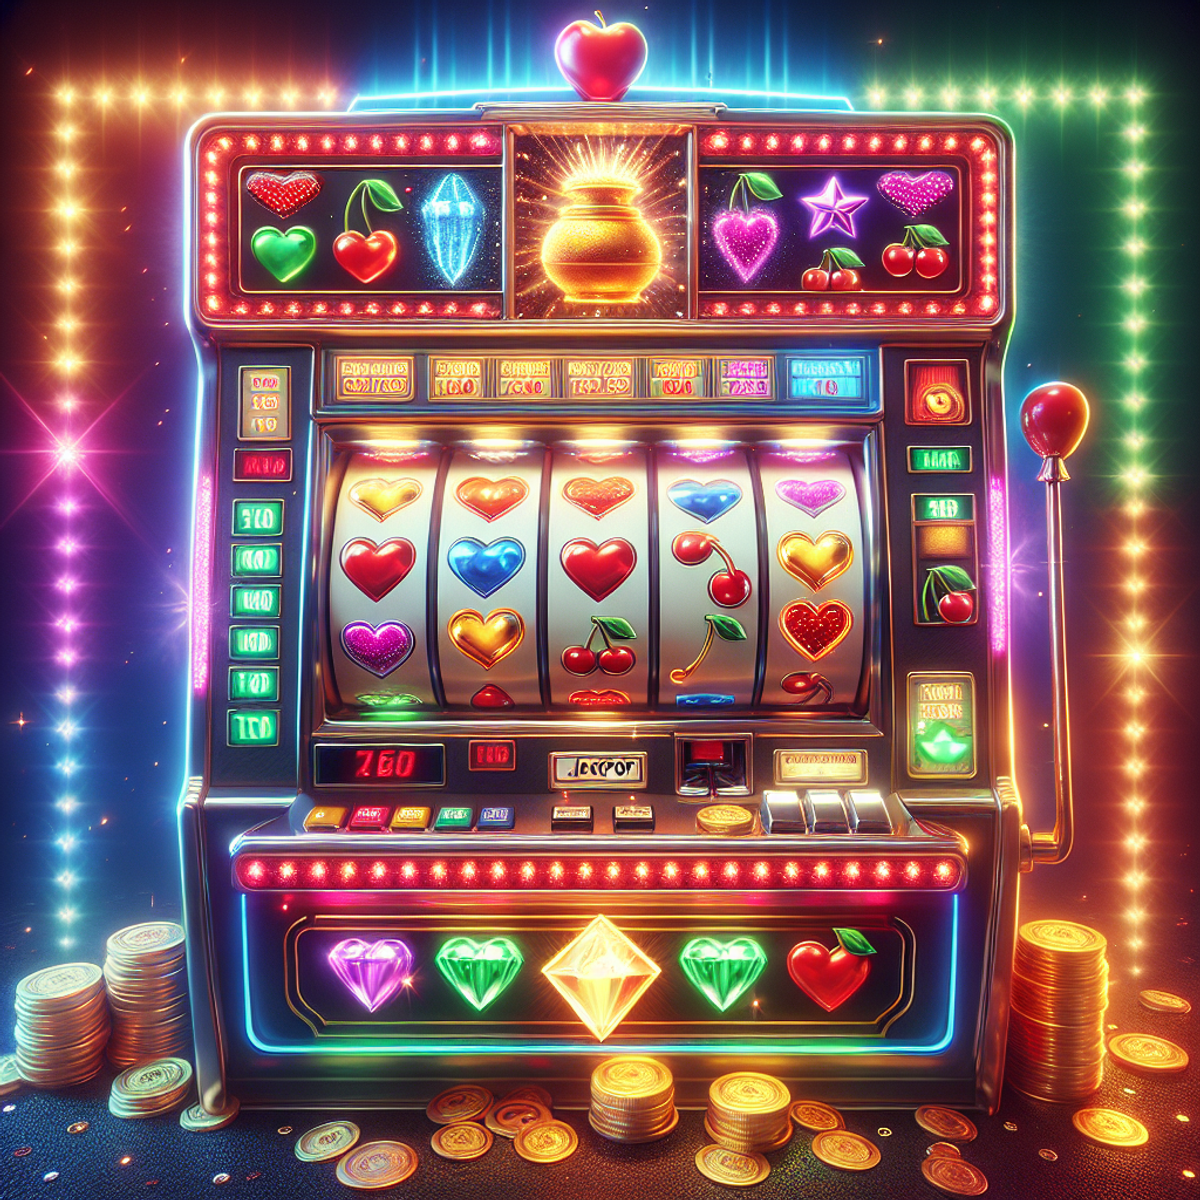 A realistic slot machine with vibrant, glowing symbols including hearts, diamonds, bells, and cherries. An illuminated non-textual jackpot symbol adds